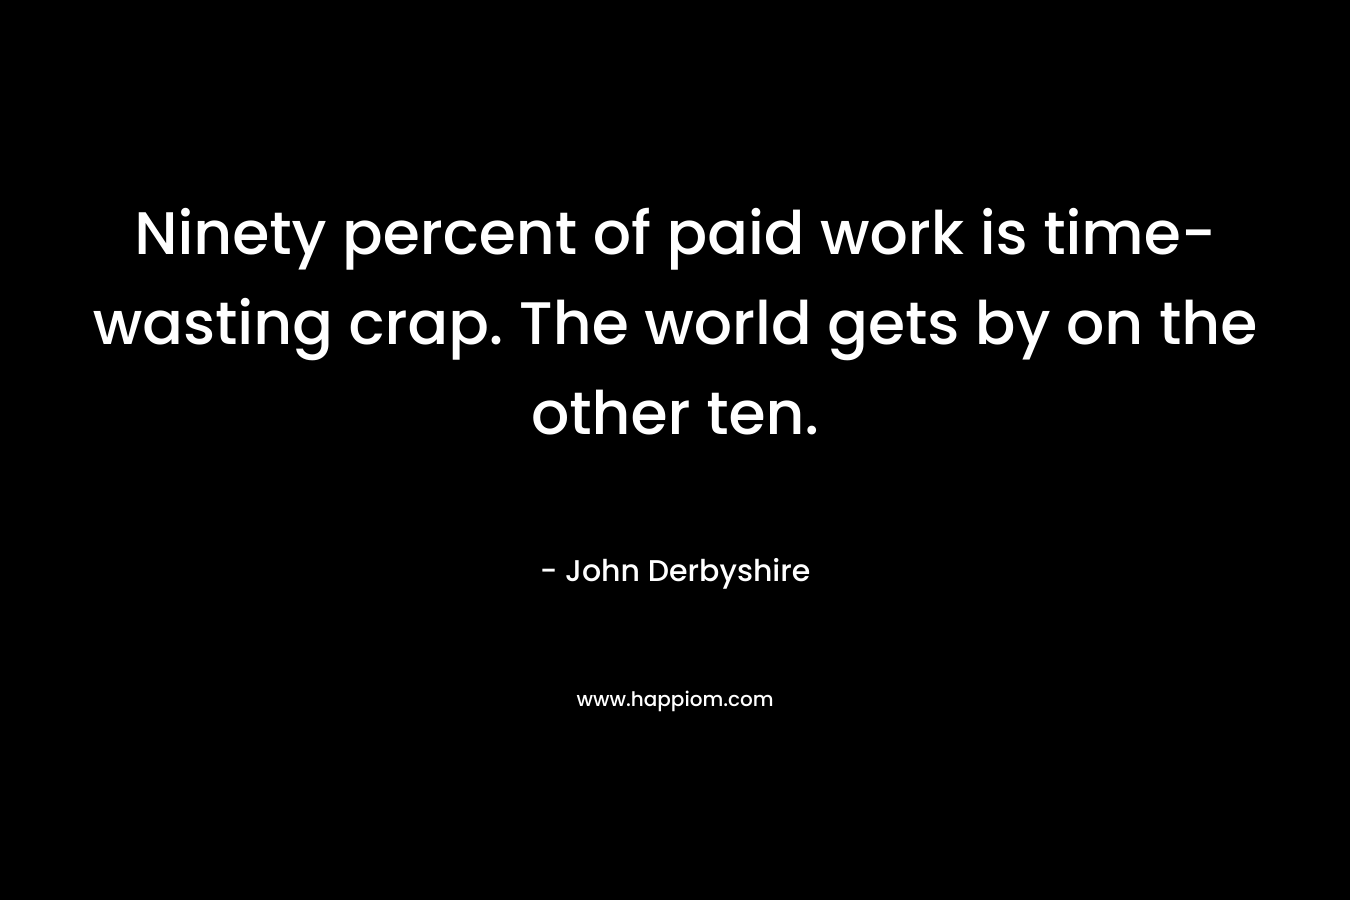 Ninety percent of paid work is time-wasting crap. The world gets by on the other ten. – John Derbyshire